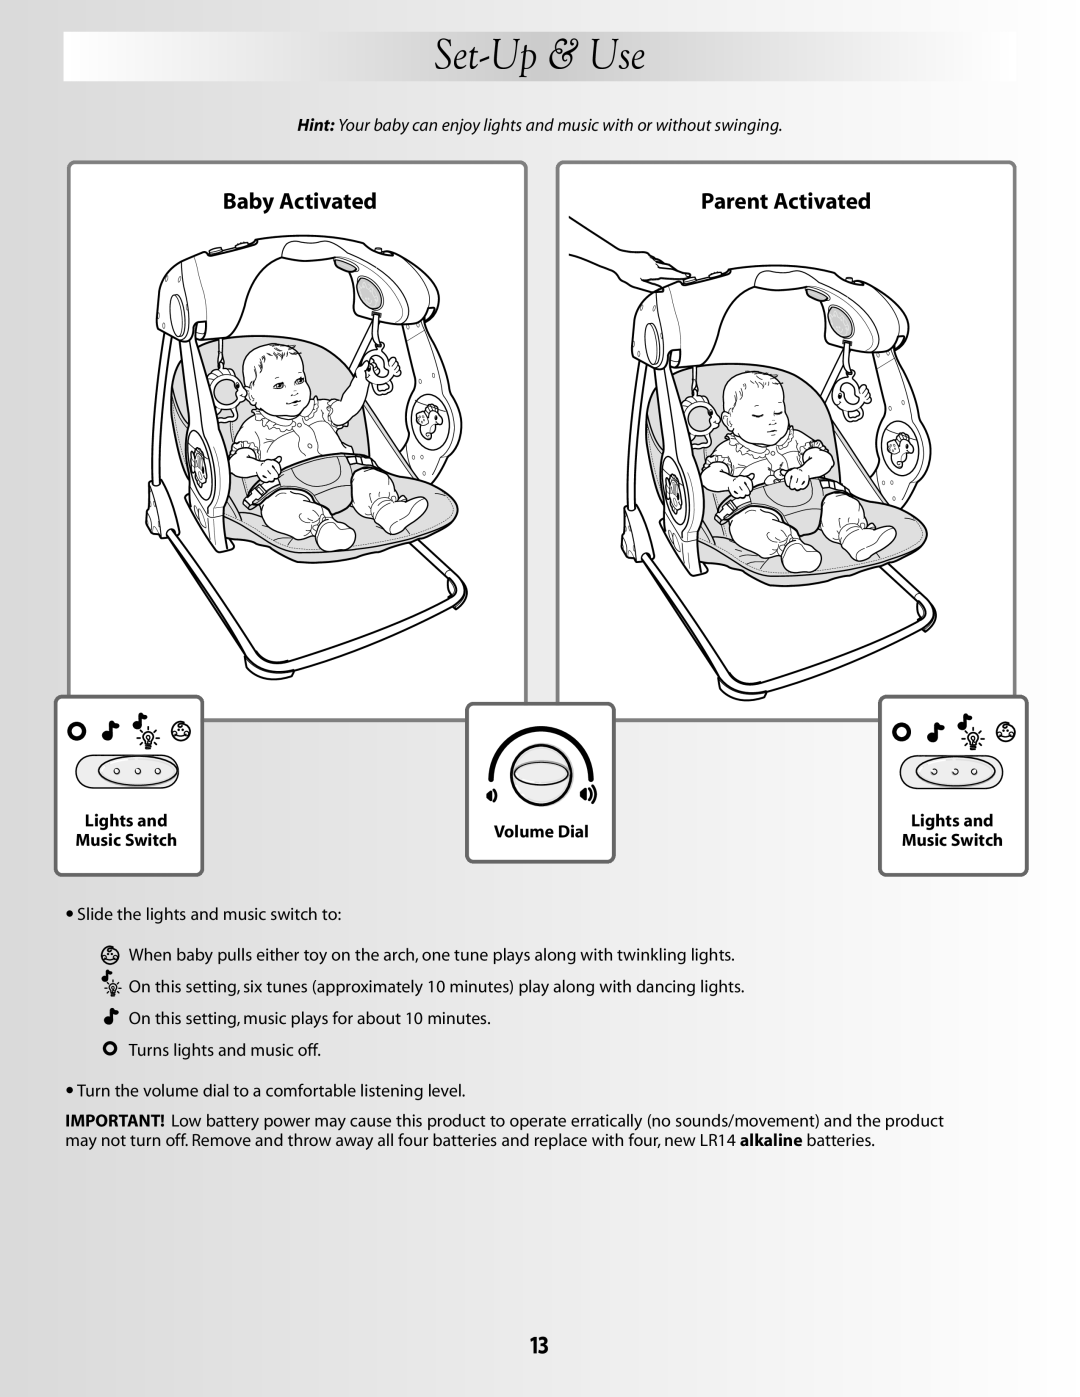 Fisher-Price G5912 manual Set-Up& Use, Baby Activated, Parent Activated, Volume Dial 